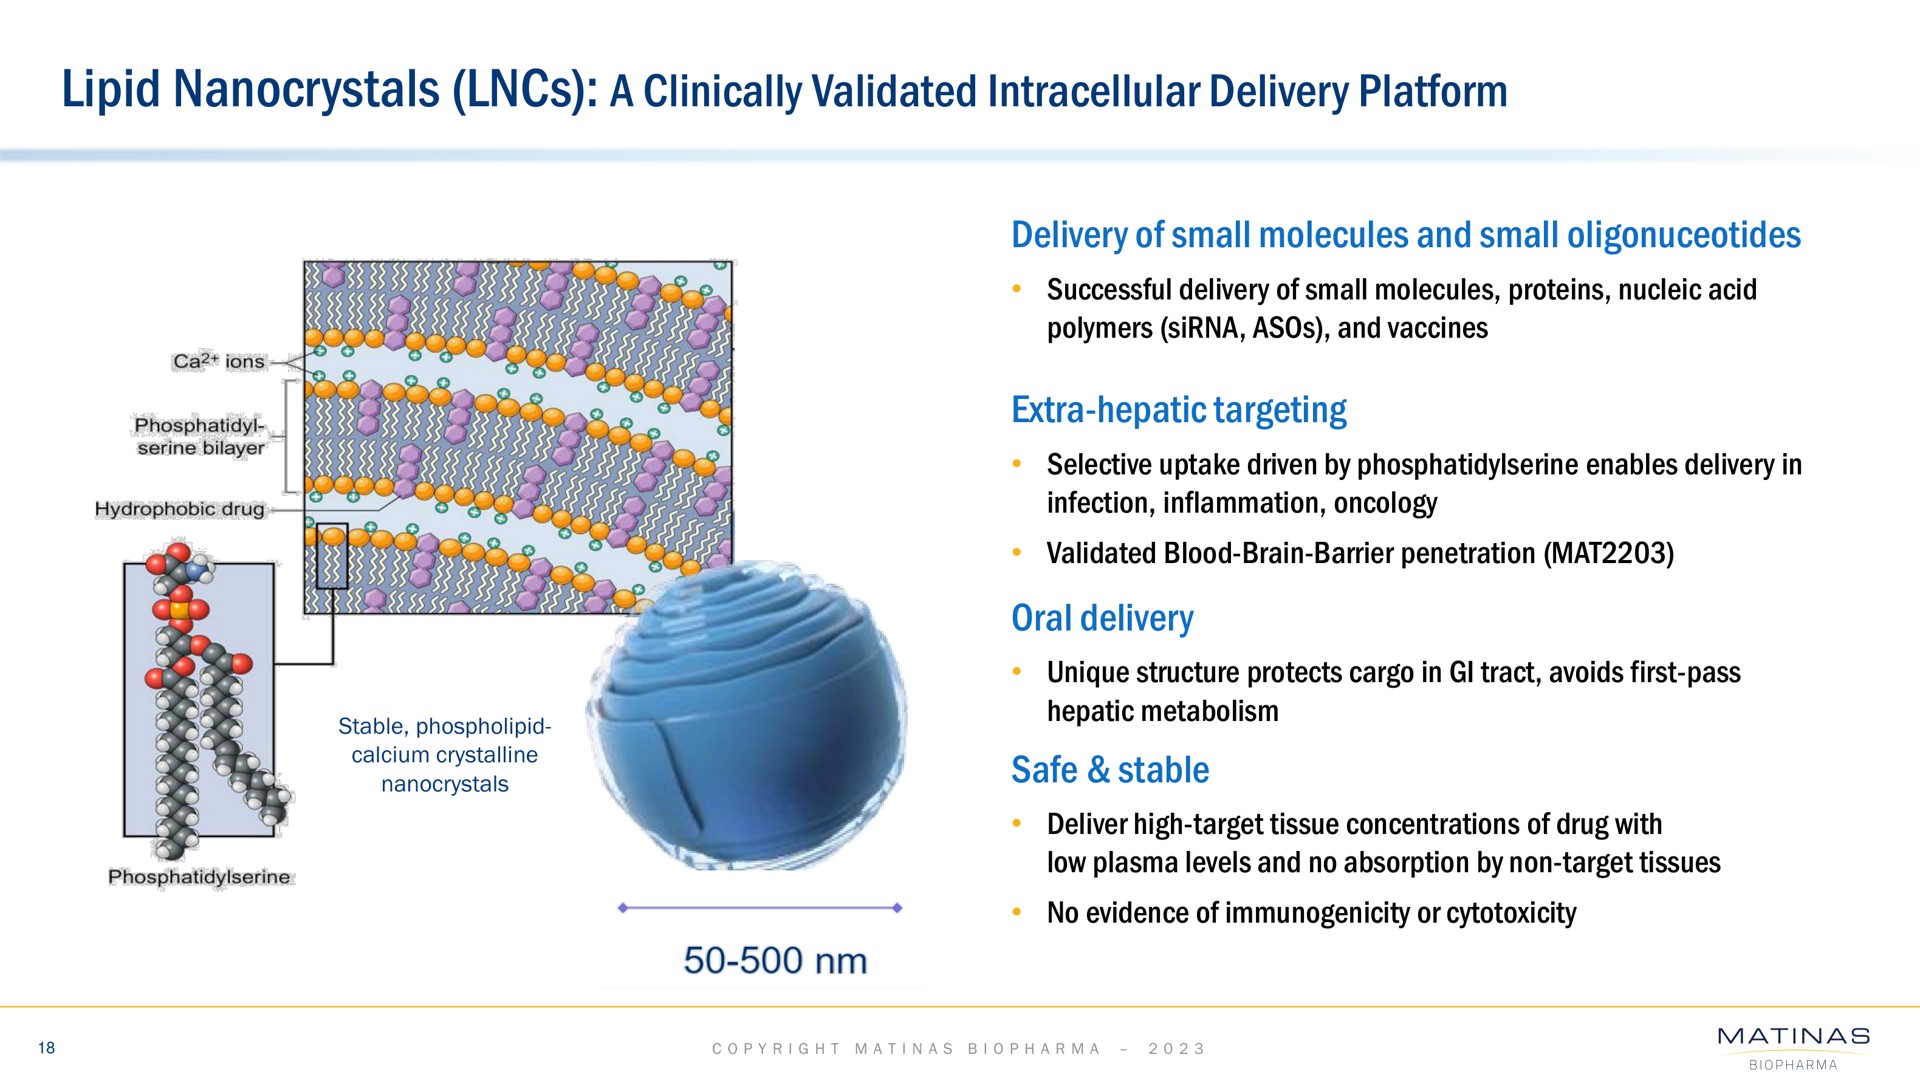 a clinically validated intracellular delivery platform a a me ion | Matinas BioPharma